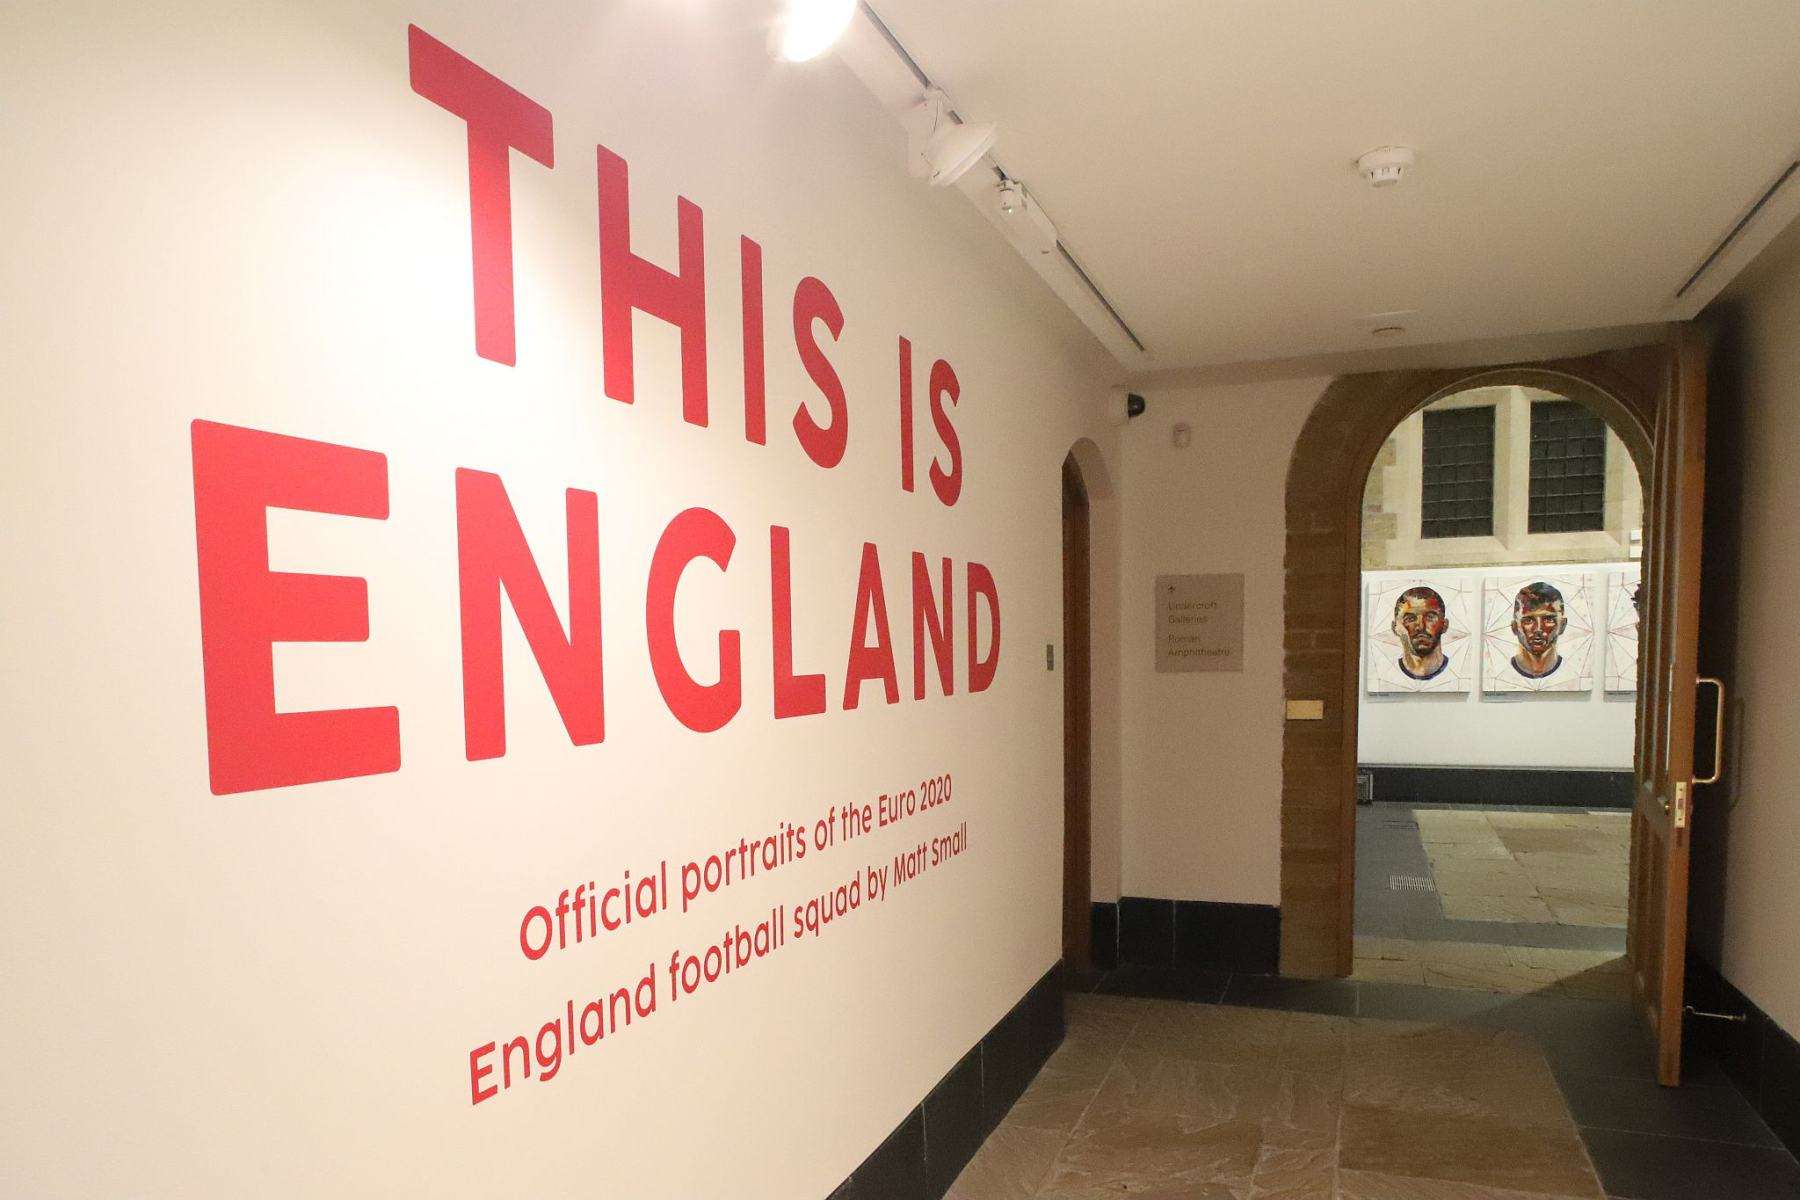 This is England - portraits of the England Euro 2020 team by Matt Small